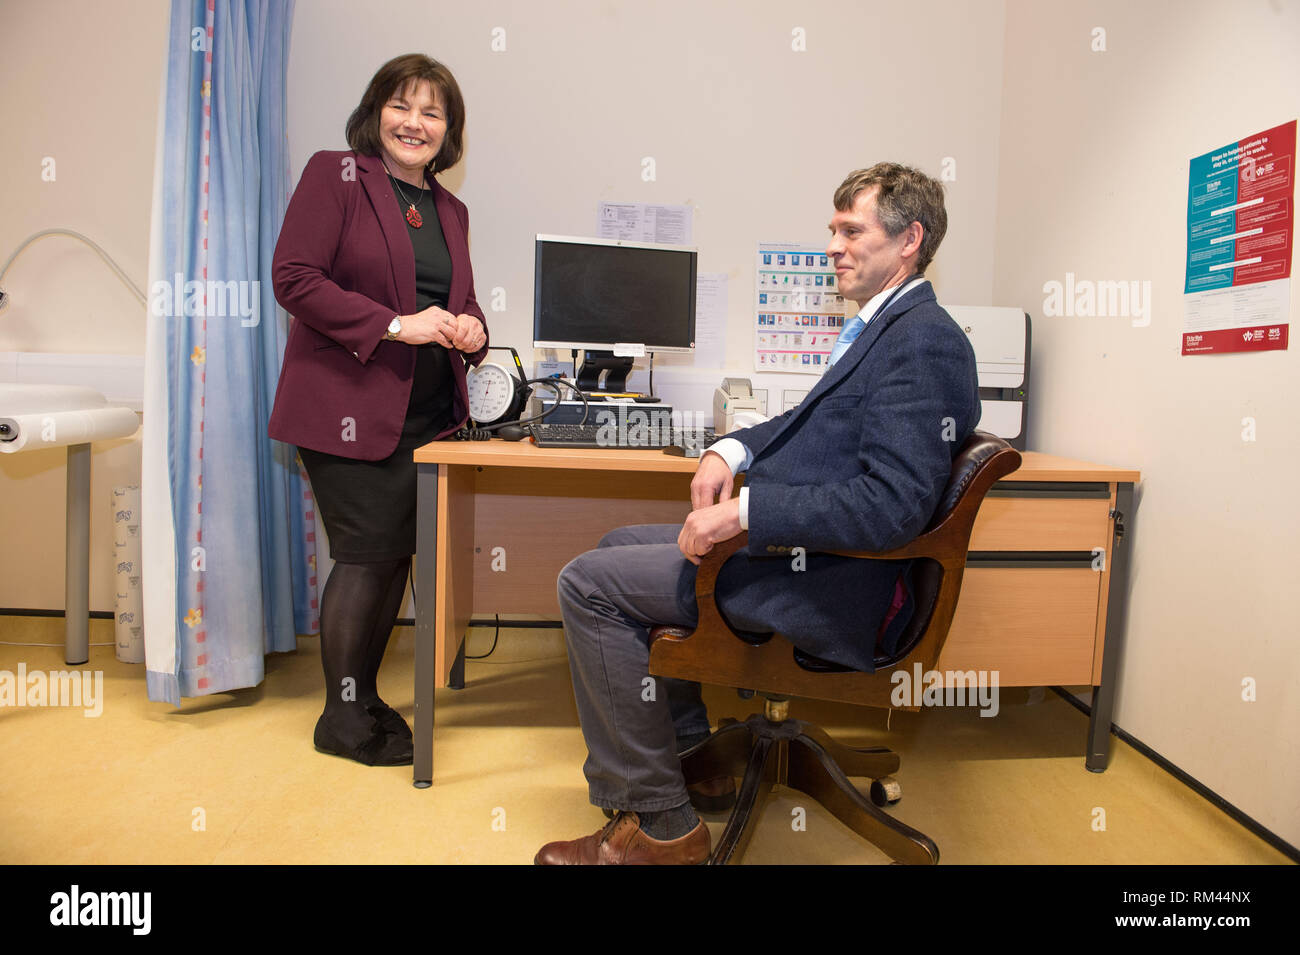 Glasgow, UK. 13th Feb, 2019. (L-R) Jean Freeman, Cabinet Secretary for Health and Sport; Alastair Douglas GP in Allander Surgery. who are pictured seen visiting a GP Practice - The Allander Surgery in Posil, Glasgow. The Health Secretary will announce funding for a scheme to give GPs extra support with the cost of running their own practices.  Credit: Colin Fisher/Alamy Live News Credit: Colin Fisher/Alamy Live News Stock Photo